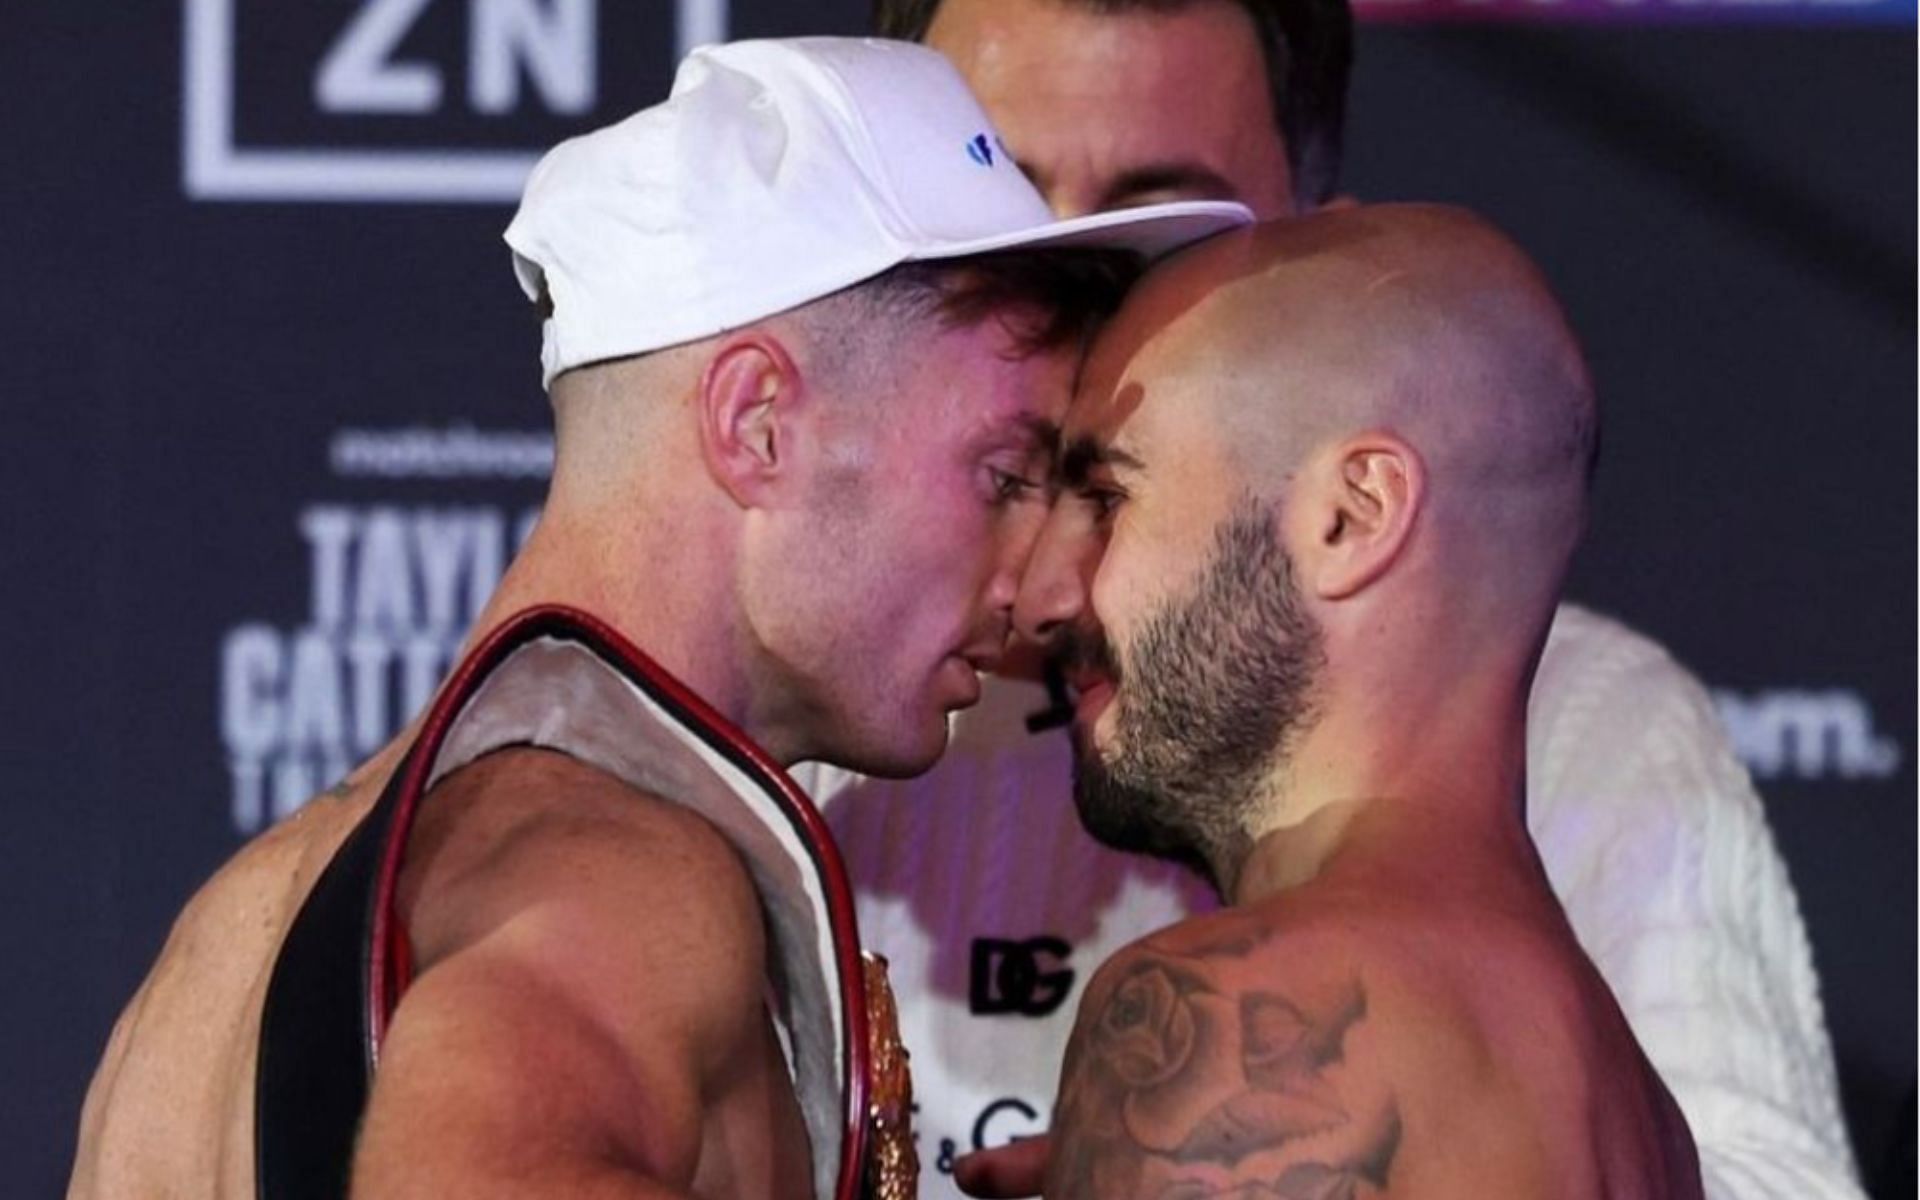 Paddy Donovan (left) and Lewis Ritson (right) engage in heated face-off ahead of their May 25 bout [Photo Courtesy @daznboxing on Instagram]